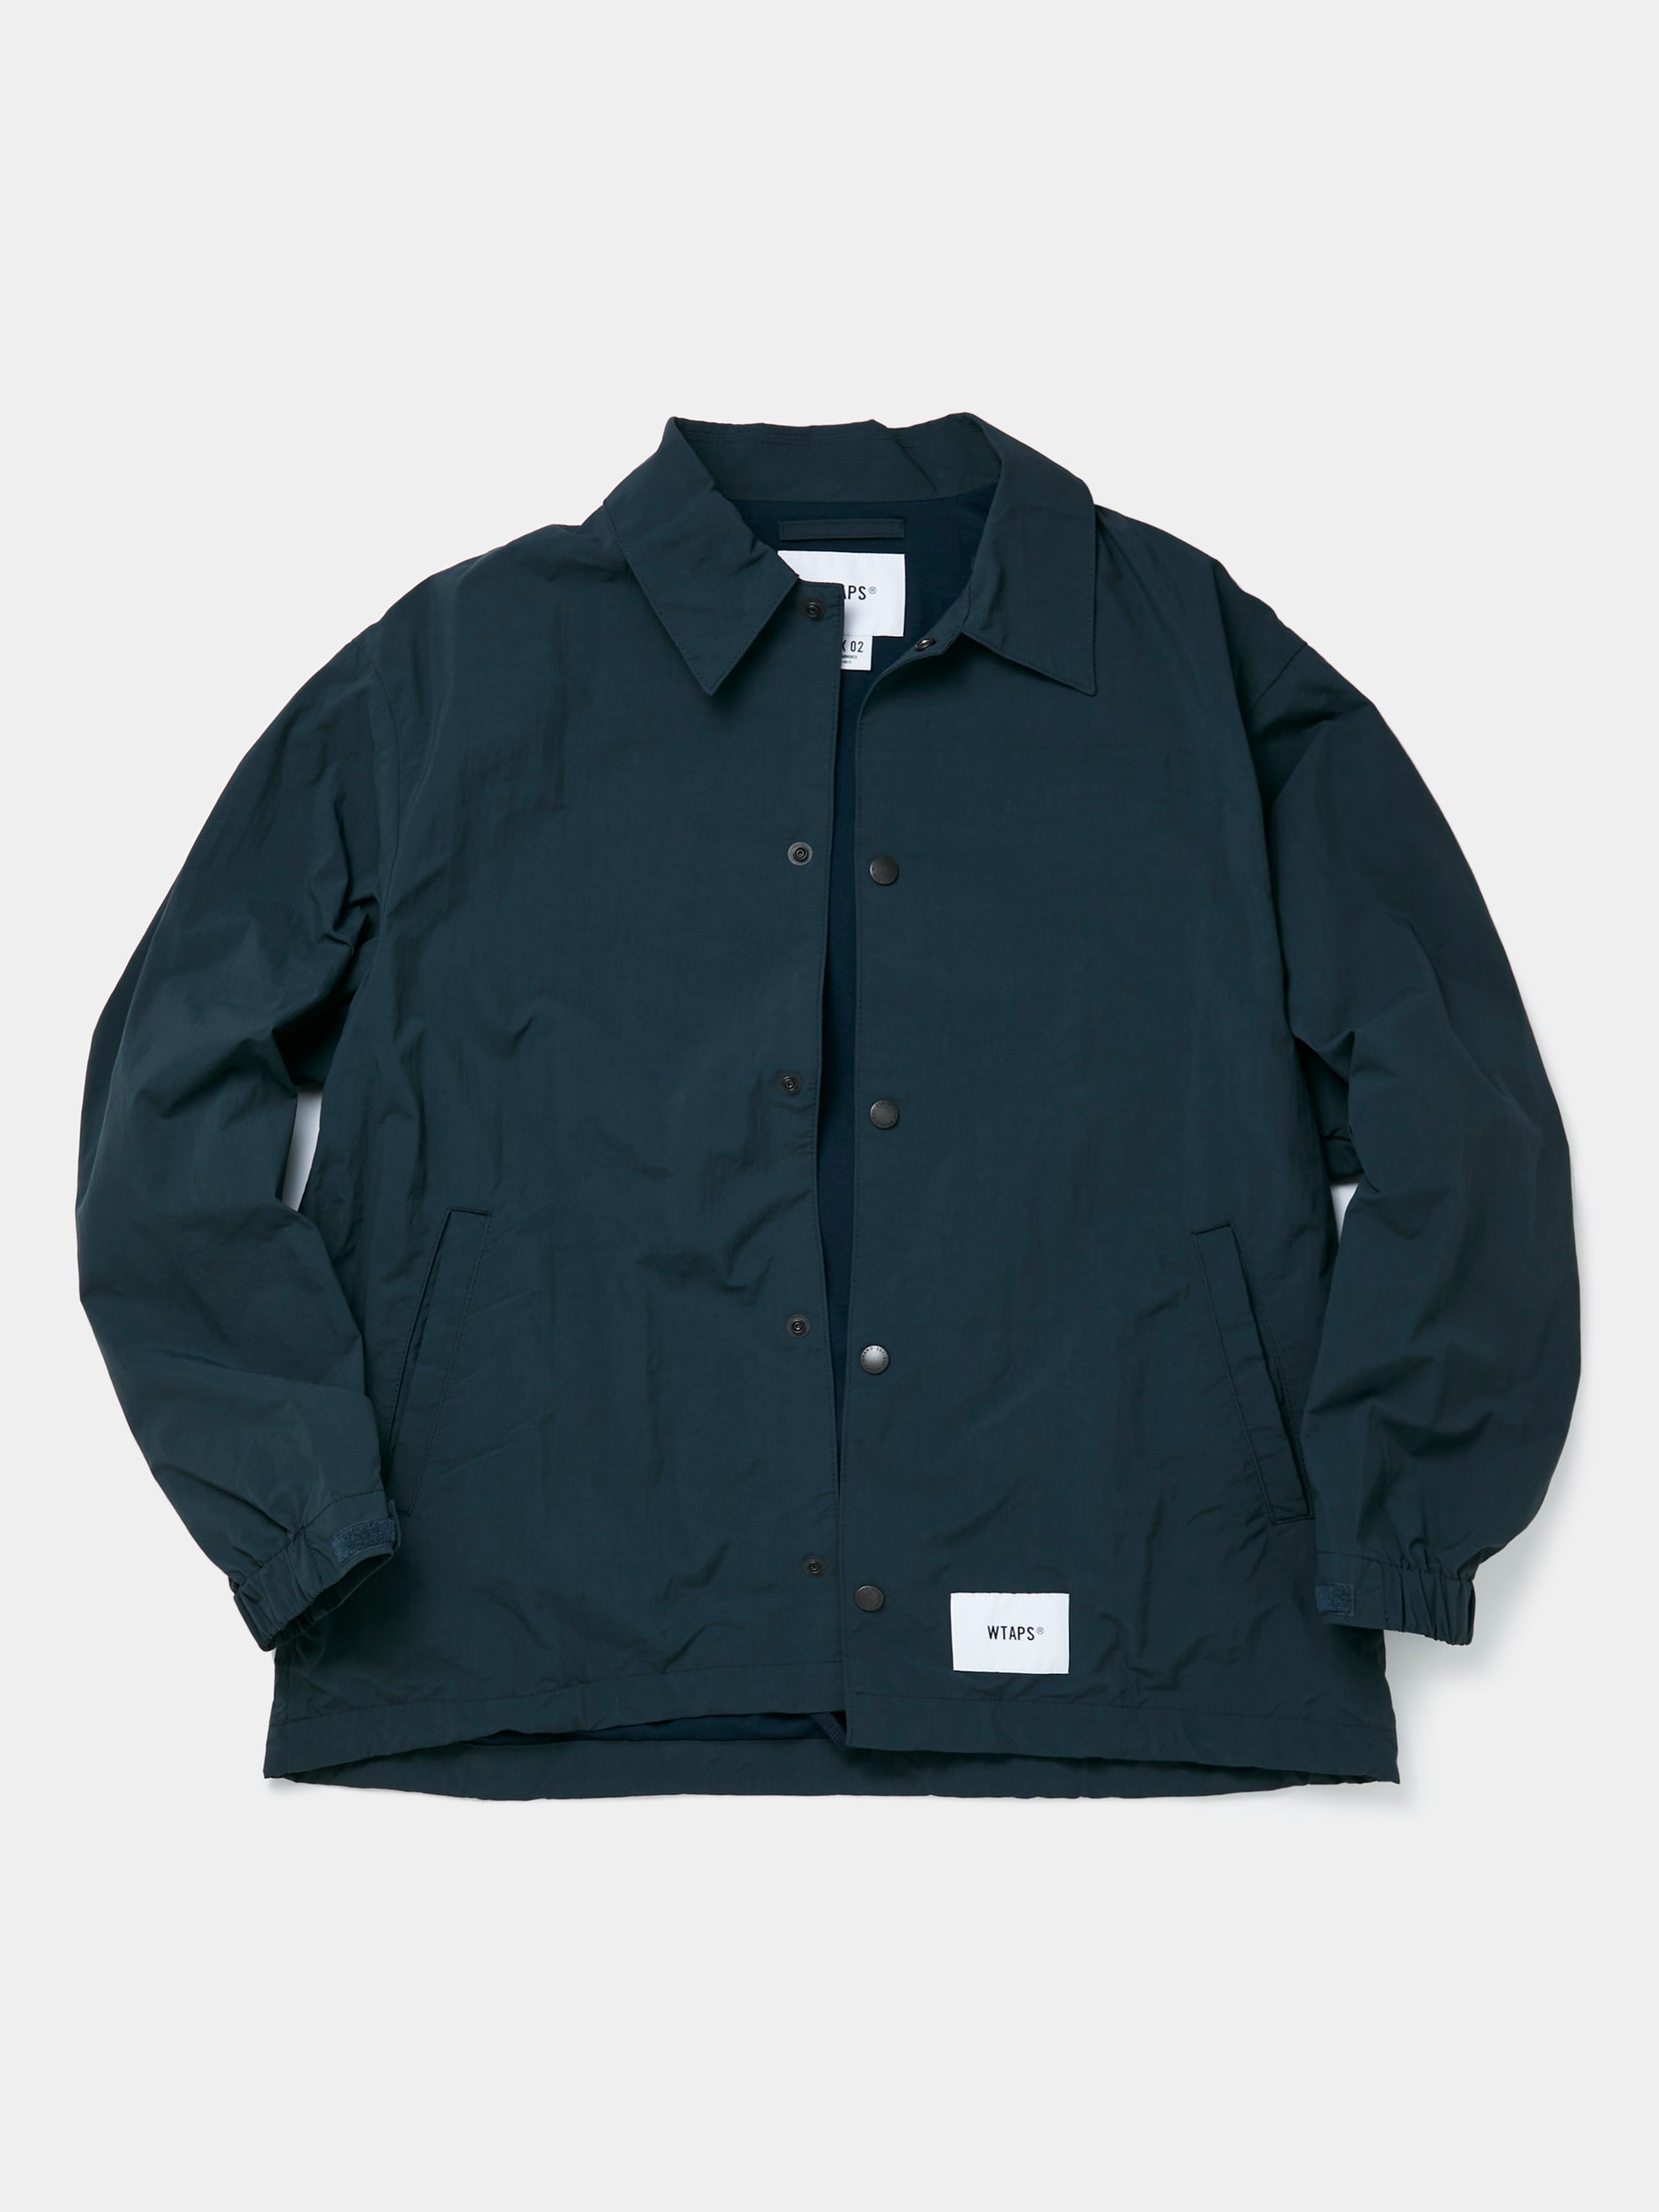 Buy Wtaps CHIEF / JACKET / NYLON. WEATHER. SIGN (NAVY) Online at